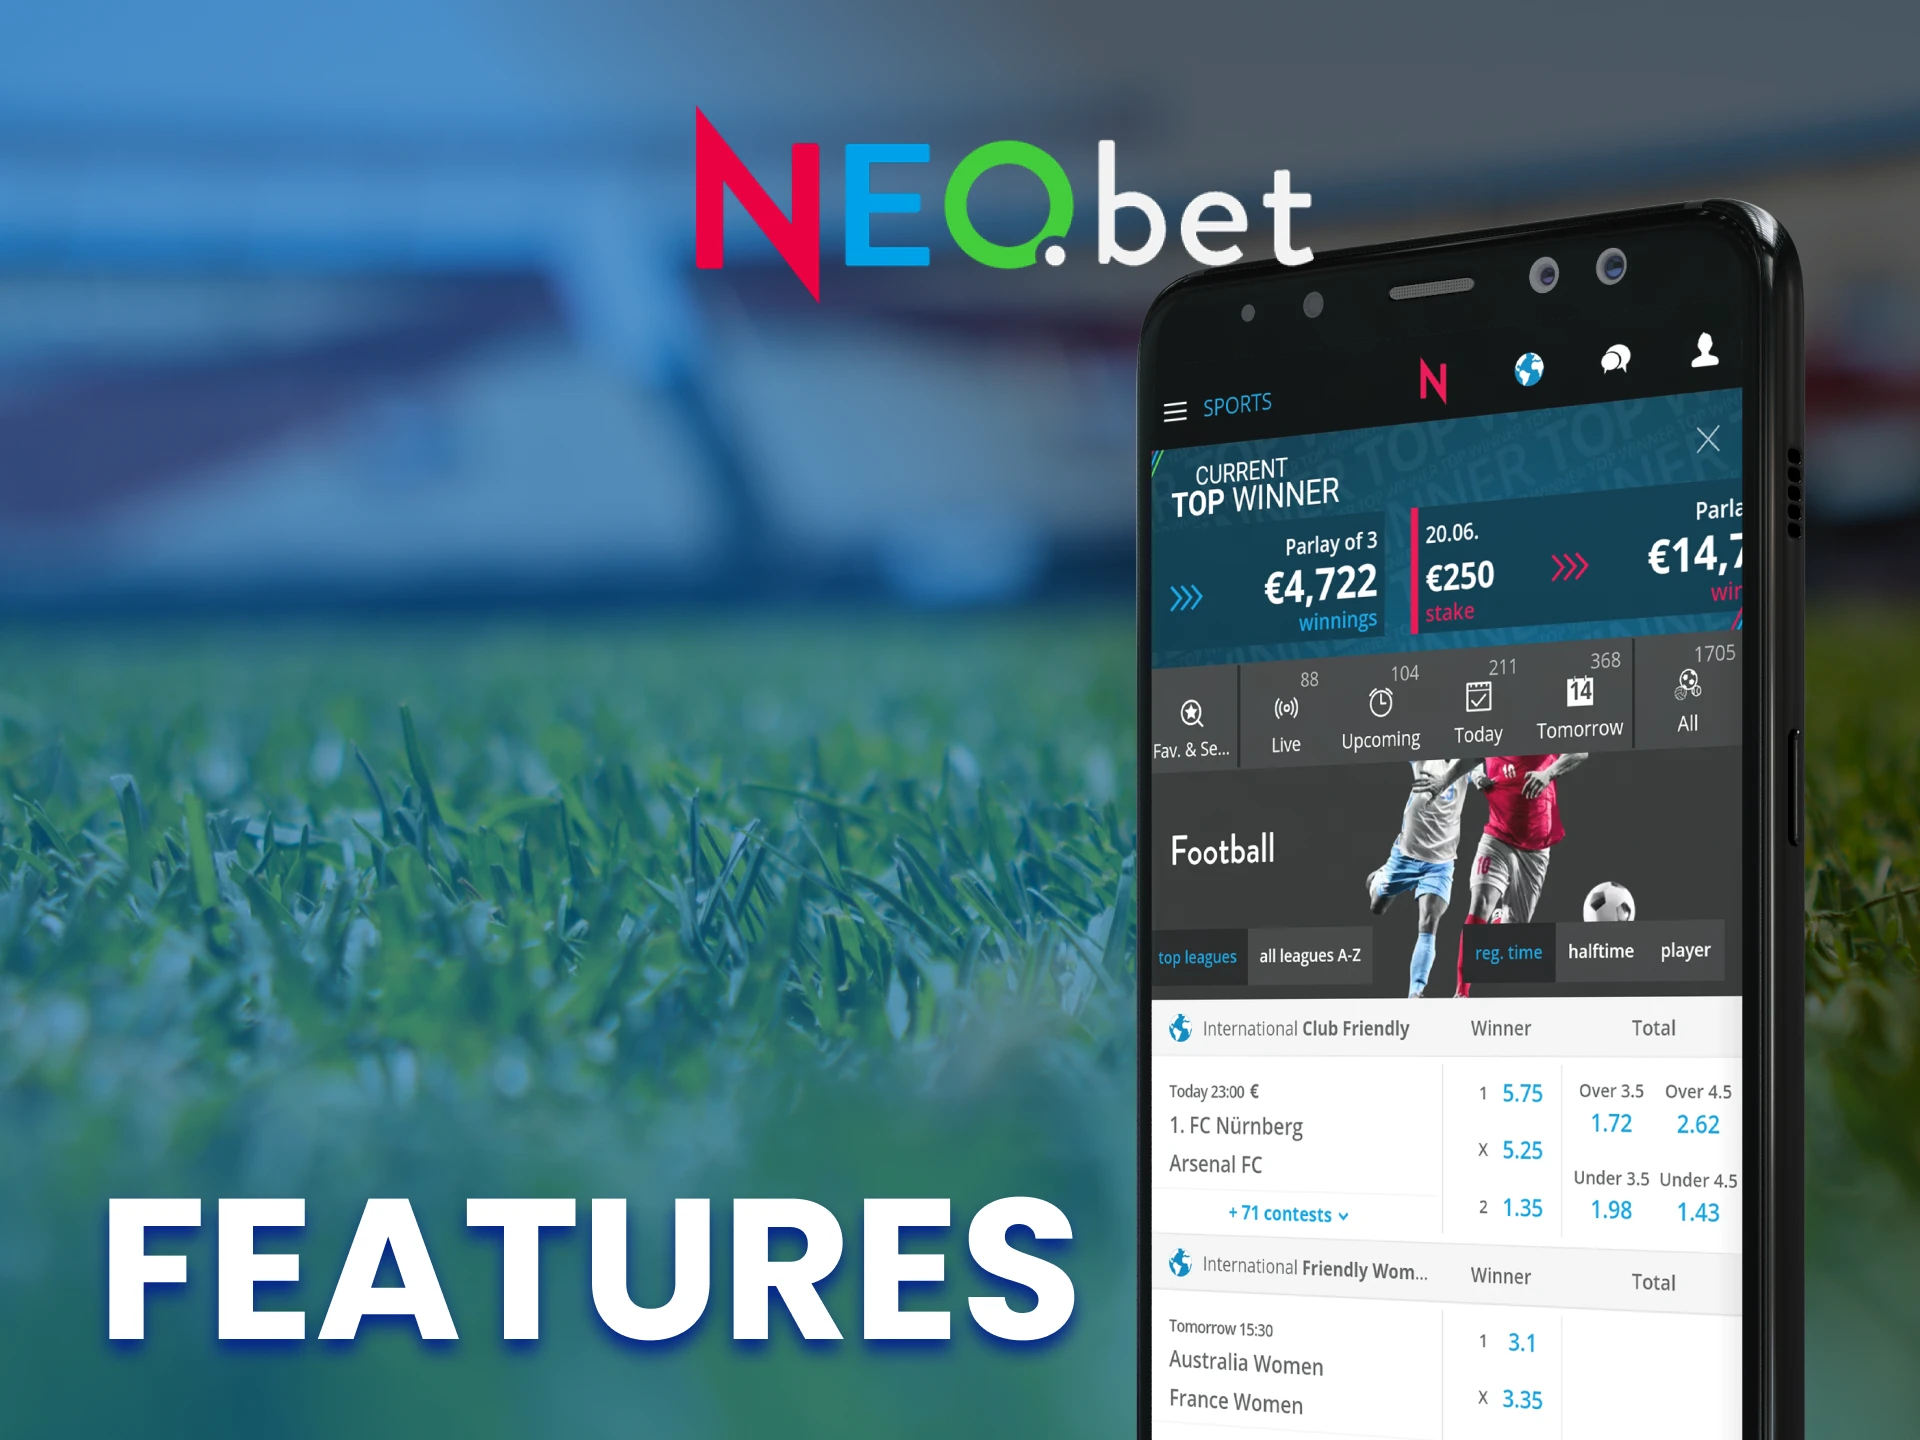 The NEO.bet app has many handy and useful features.